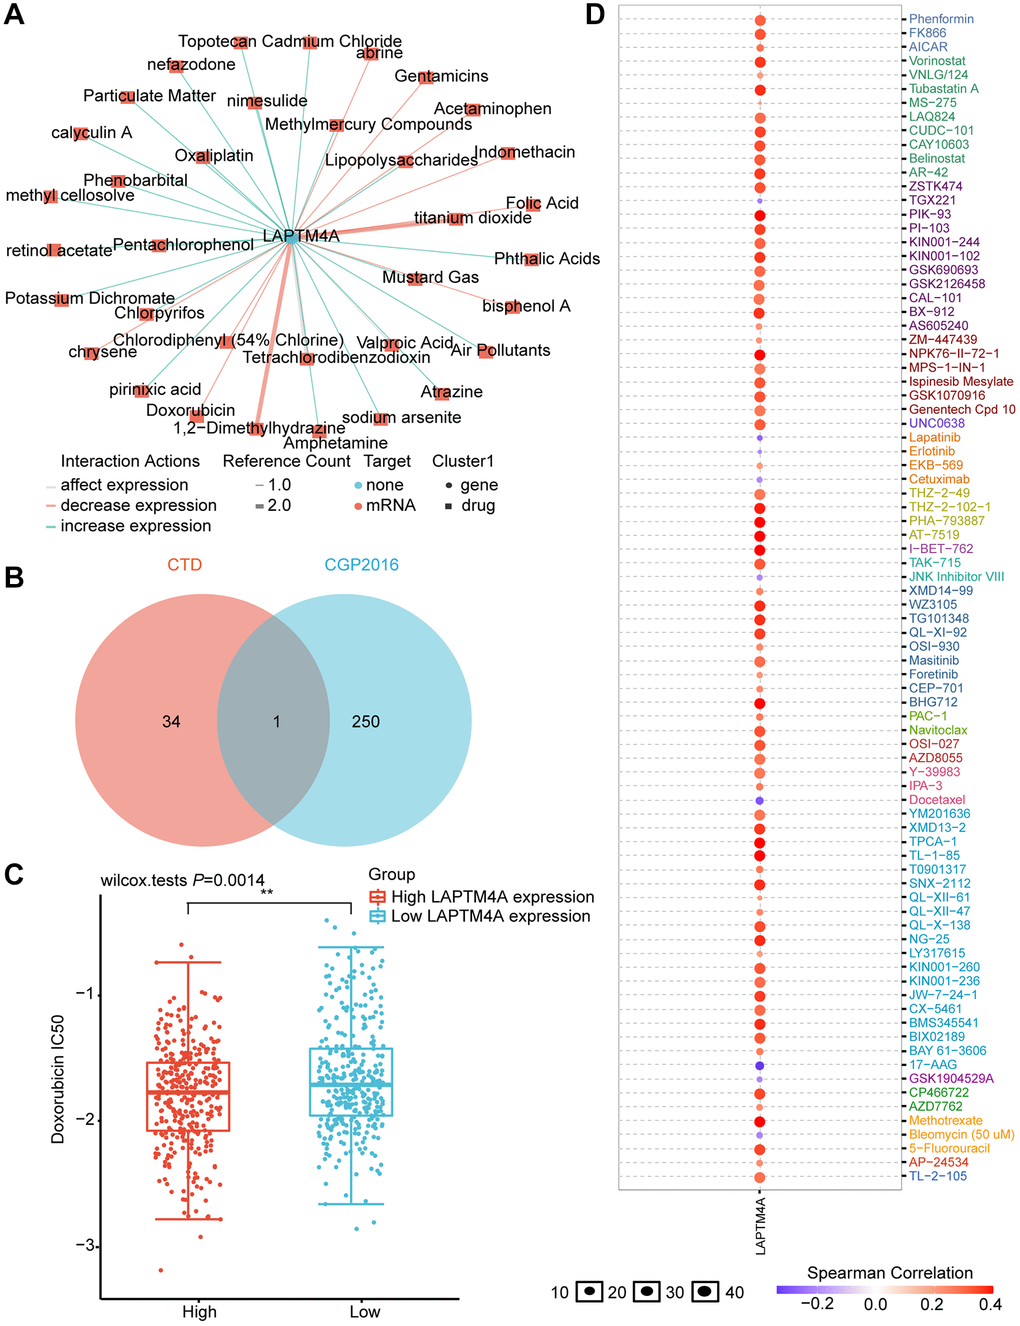 Prediction of LAPTM4A expression-related drugs. (A) An advanced network diagram shows 37 cancer-related drugs that can modulate LAPTM4A expression. (B) A Venn diagram demonstrates drugs related to LAPTM4A expression in CTD and cgp2016. (C) Relationship between LAPTM4A expression and IC50 of doxorubicin. (D) LAPTM4A is resistant to 73 drugs and sensitive to 9 drugs.